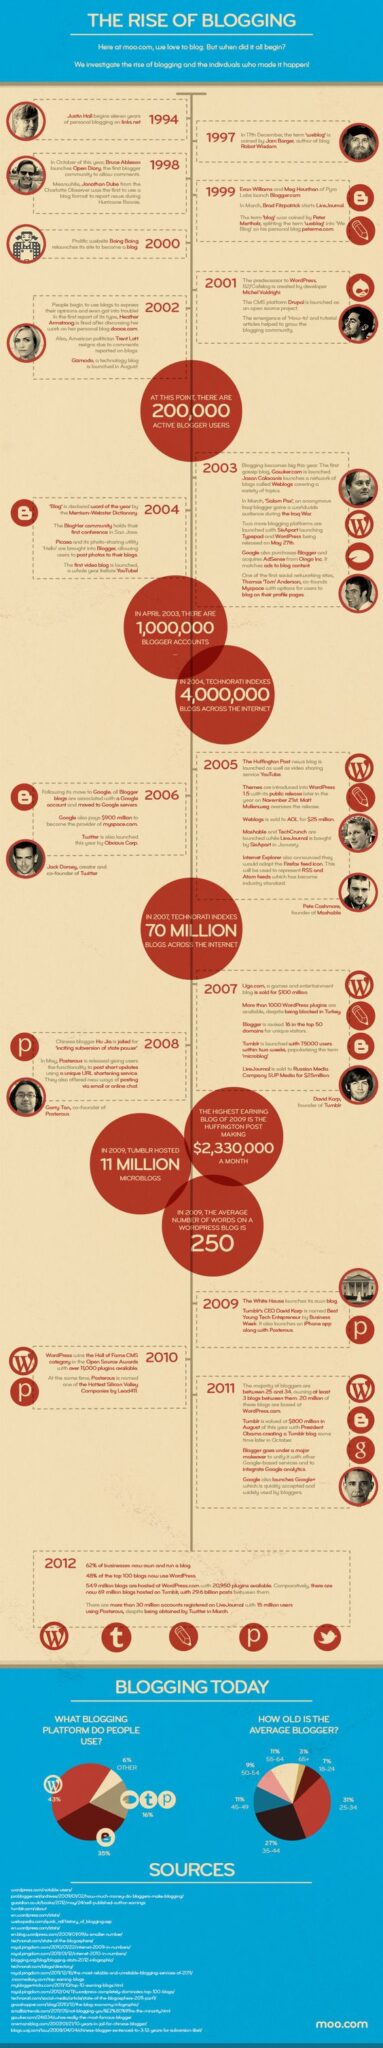 Blogging History Infographic - I Was Blogging Before, During, and Long After It Was Cool